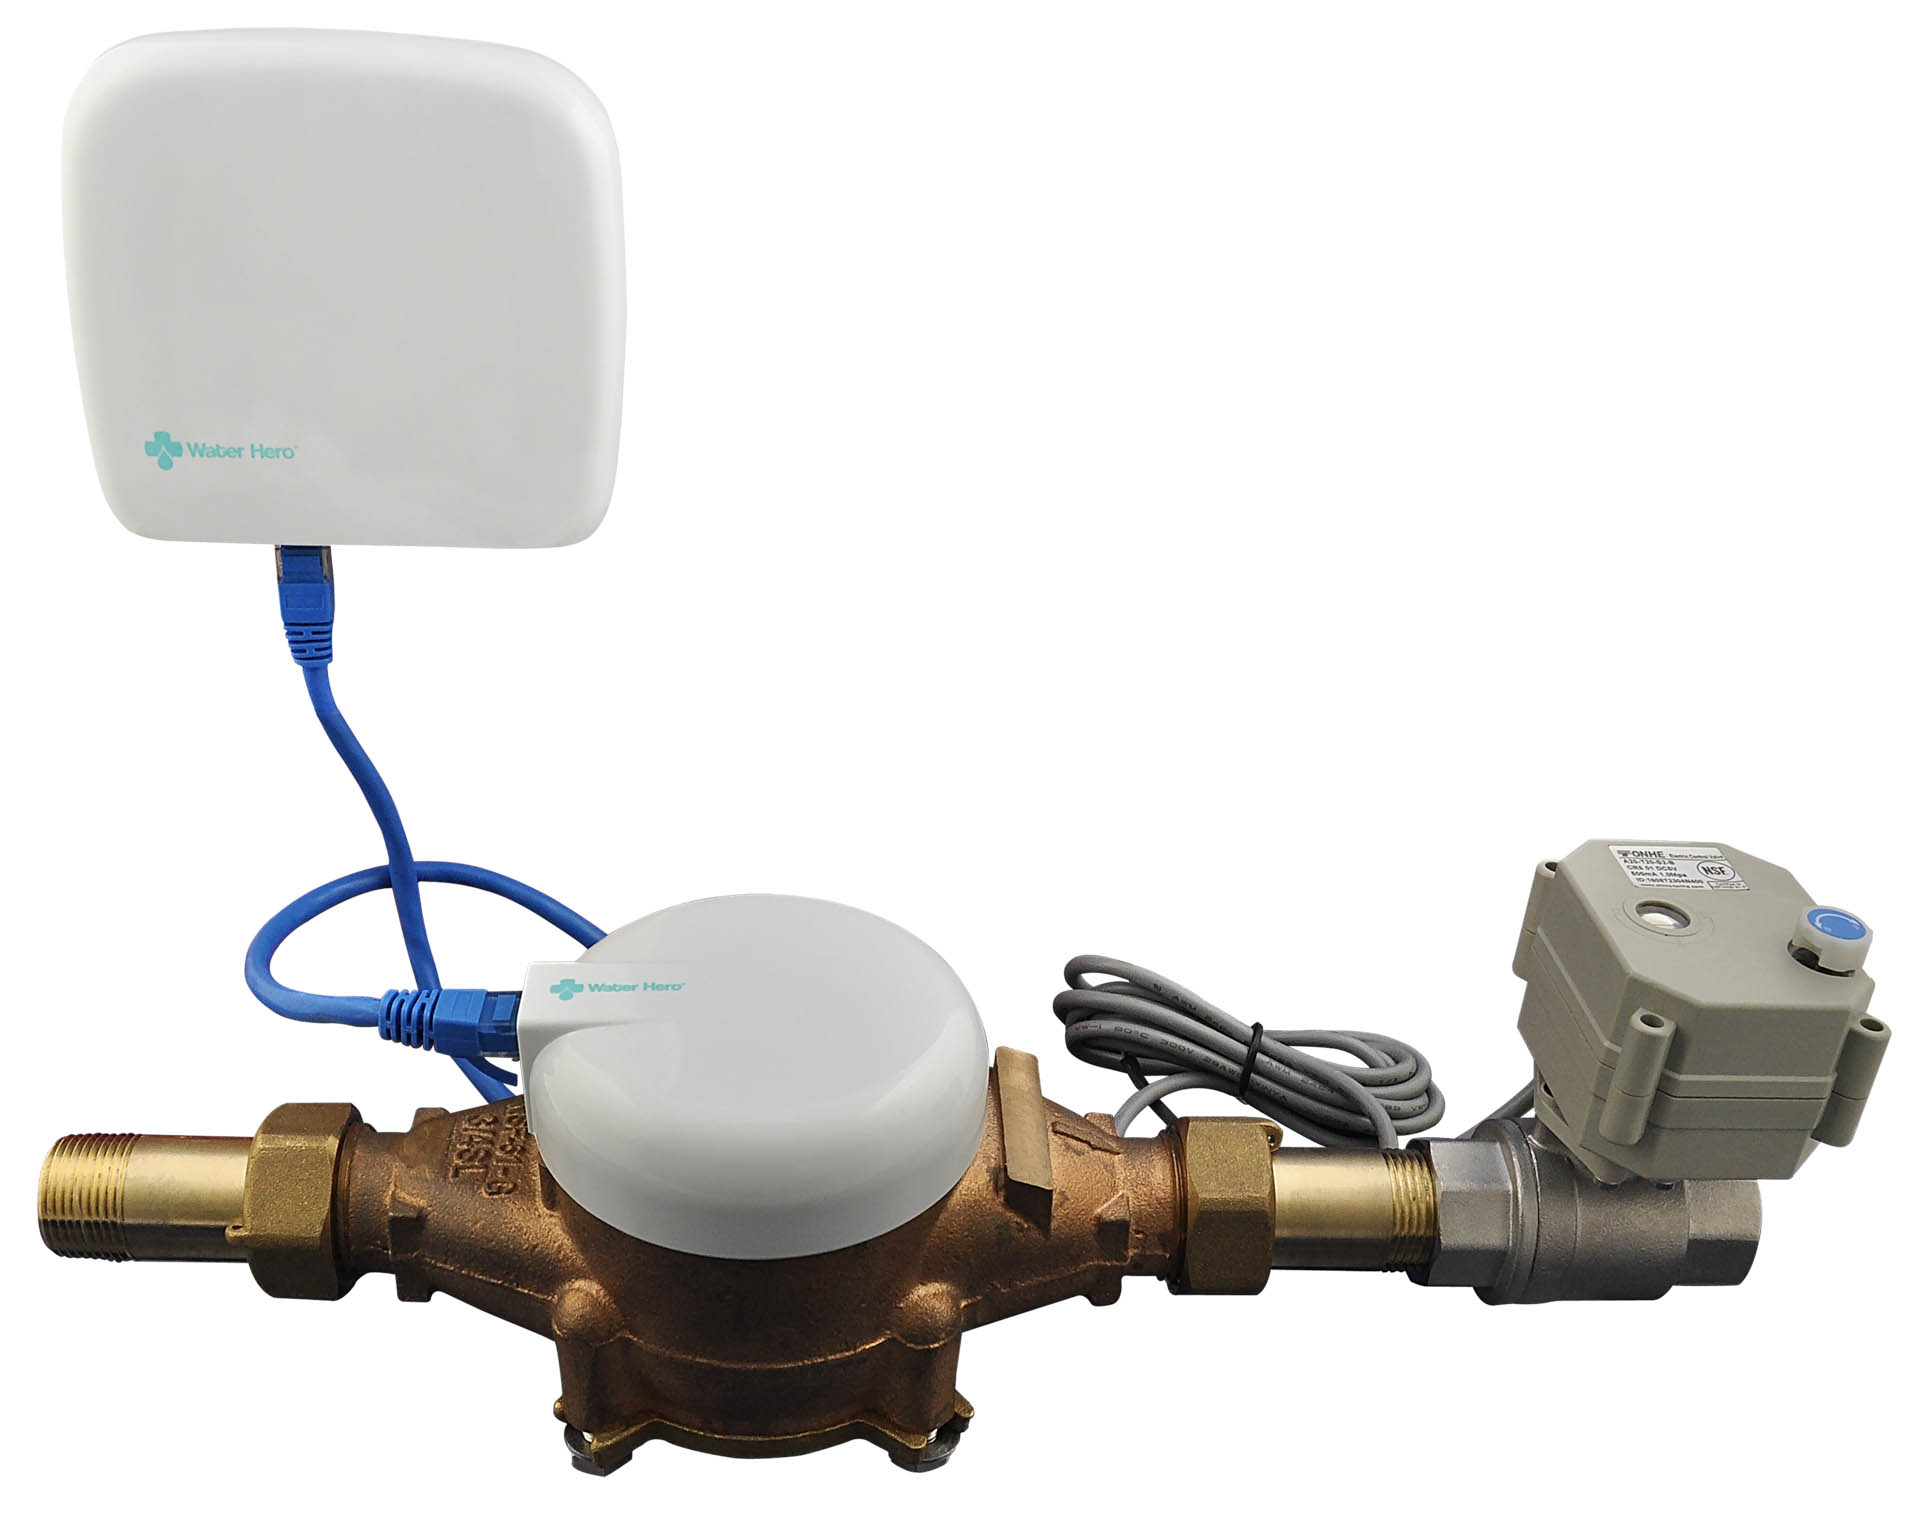 The Water Hero P-100 system consists of the Main Controller (top left), special Water Meter and Sensor Cap (lower left) and Motorized Ball Valve (lower right. Image: Water Hero.